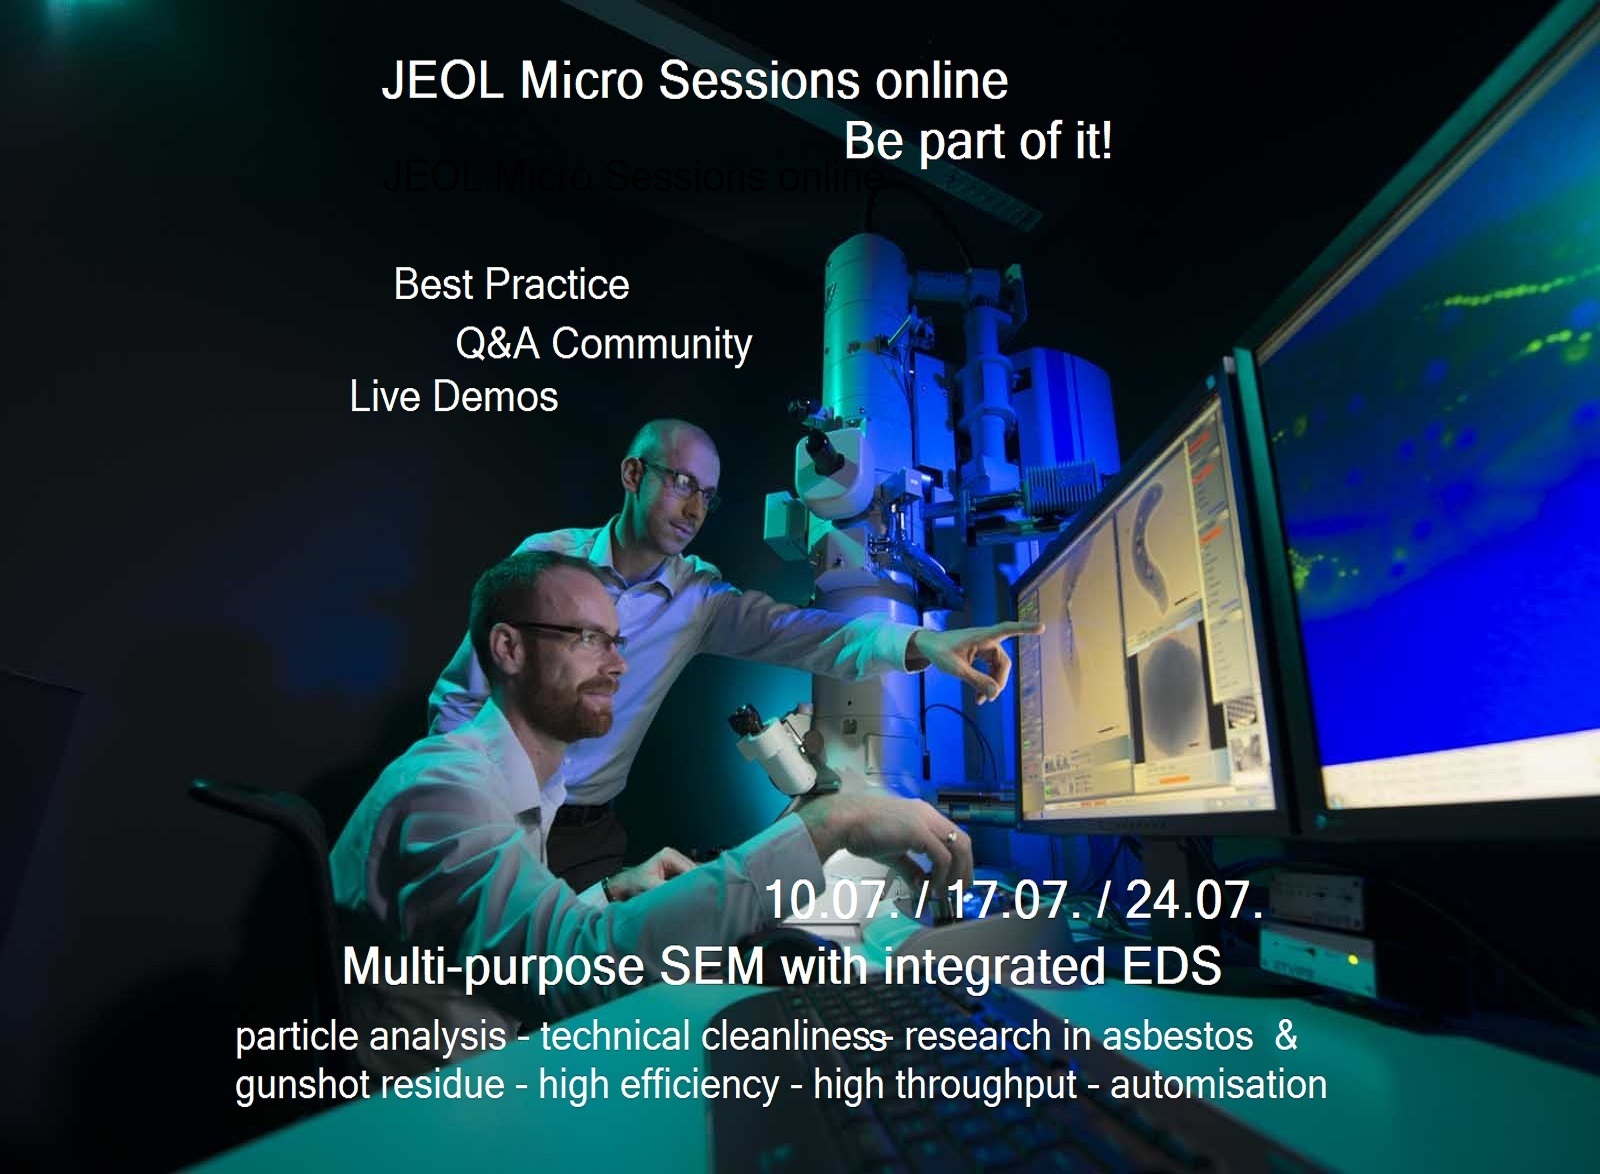 Jeol starts Micro Sessions